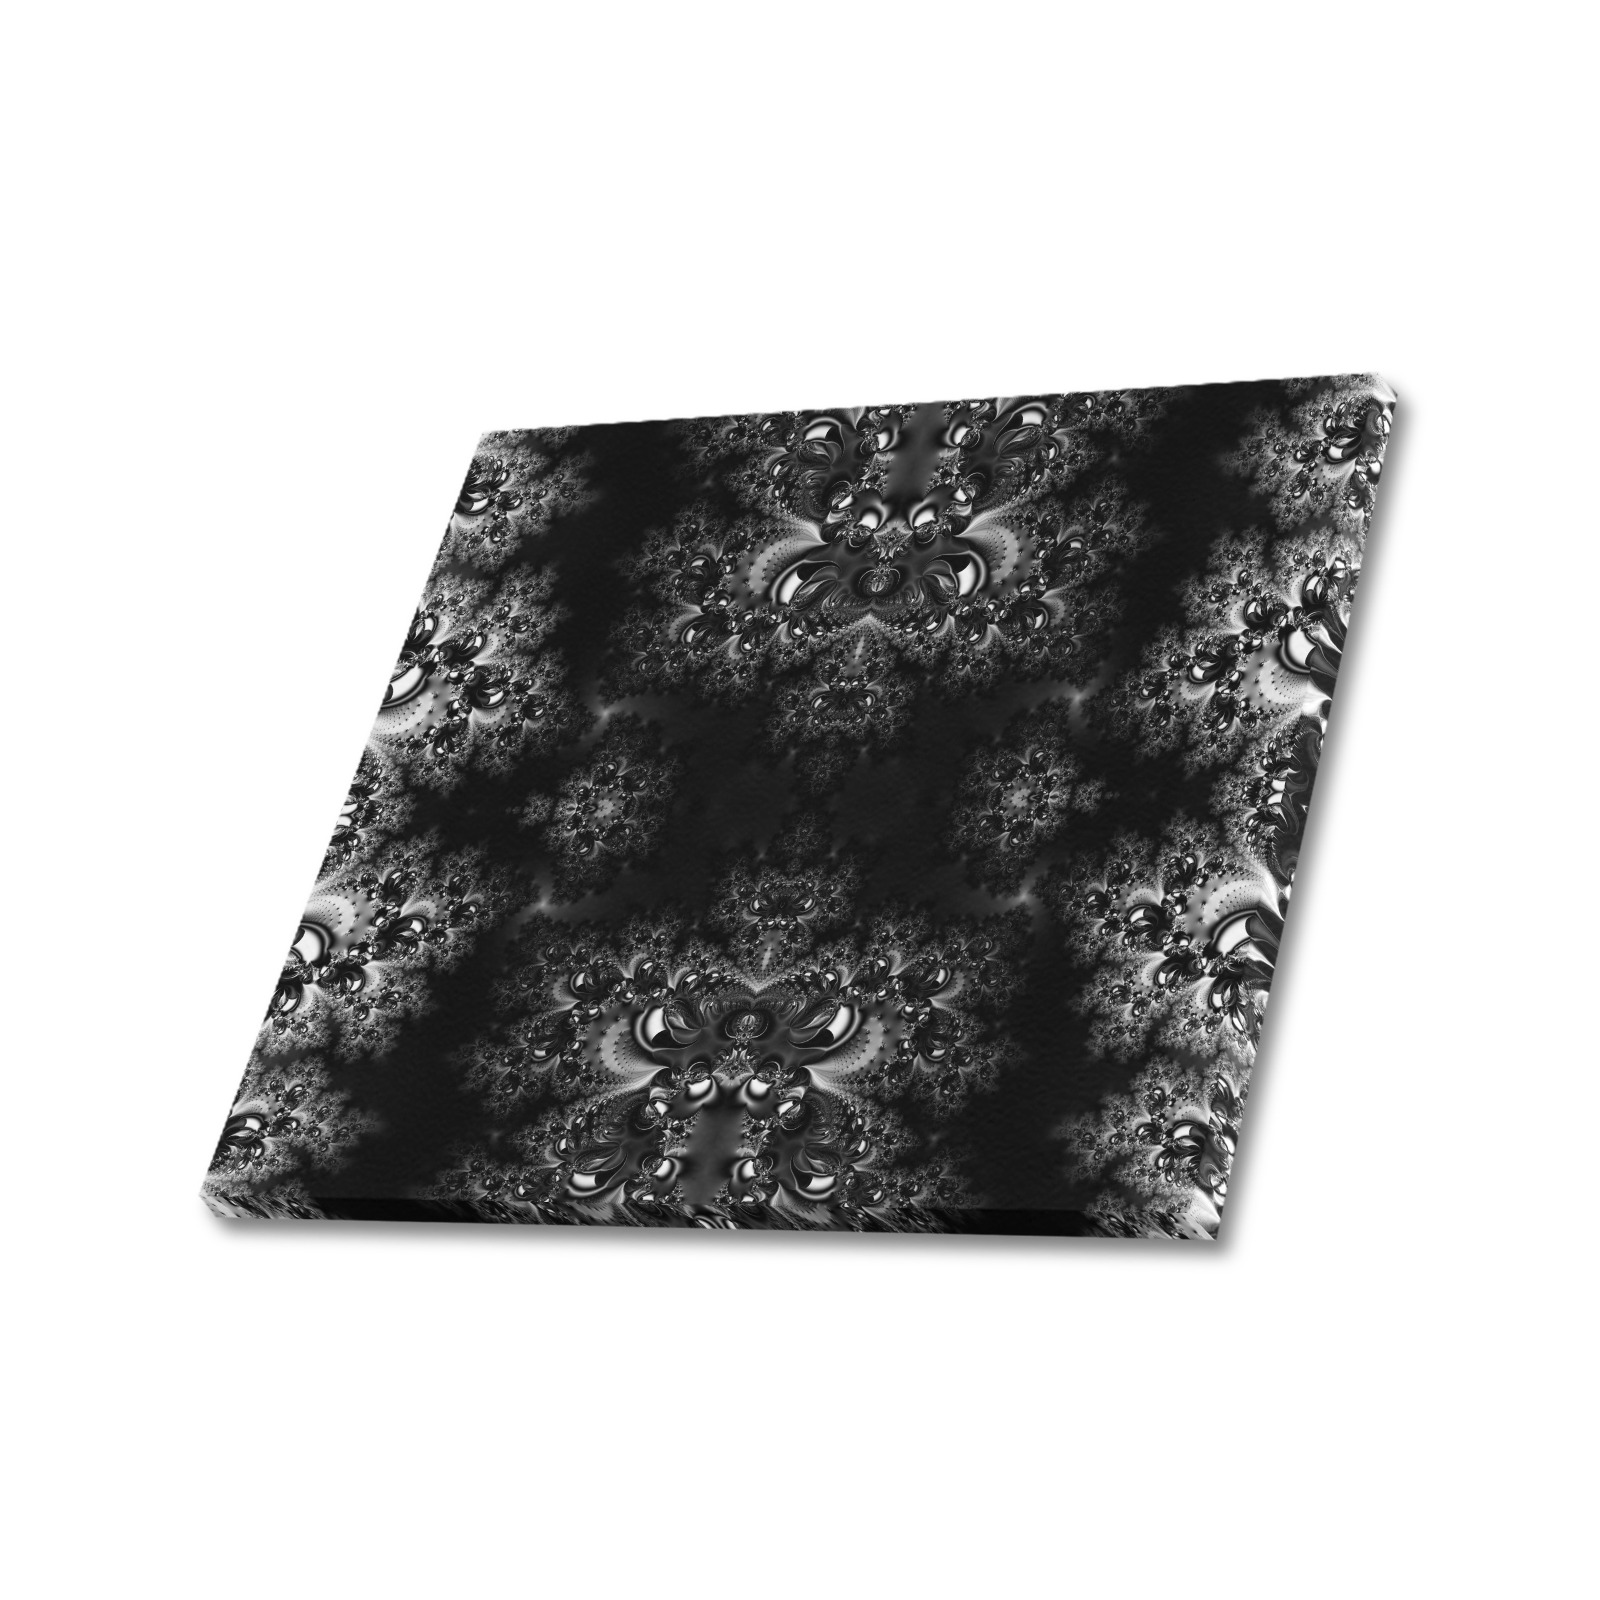 Frost at Midnight Fractal Frame Canvas Print 24"x20"